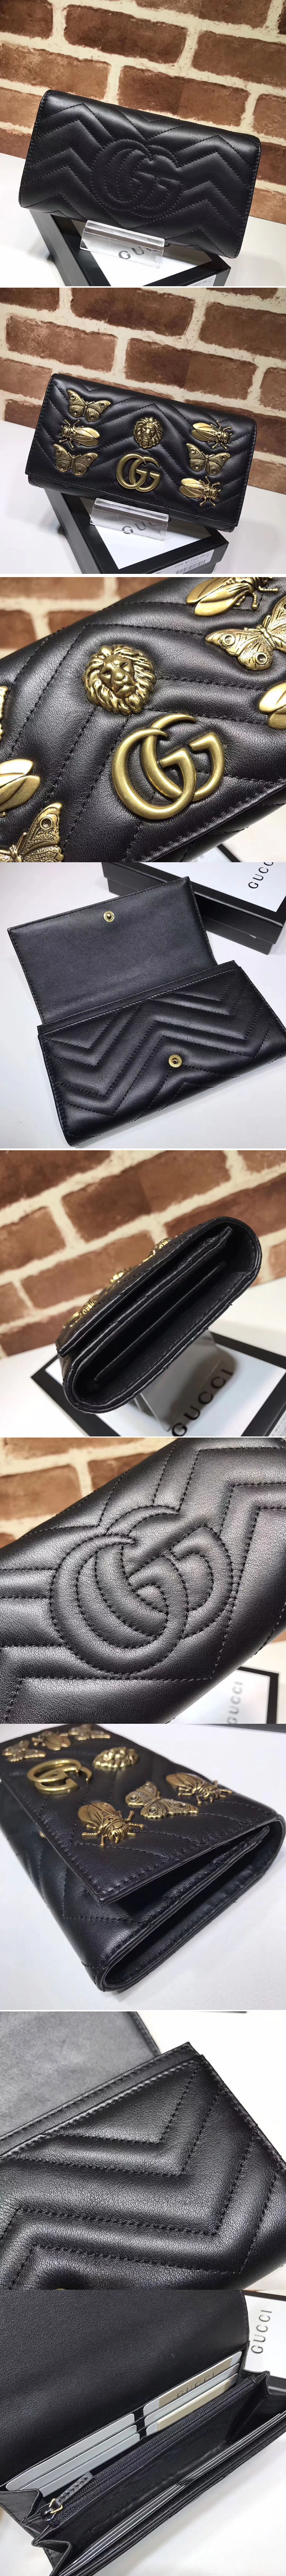 Replica Gucci 443436 GG Marmont continental With Animal wallet Black